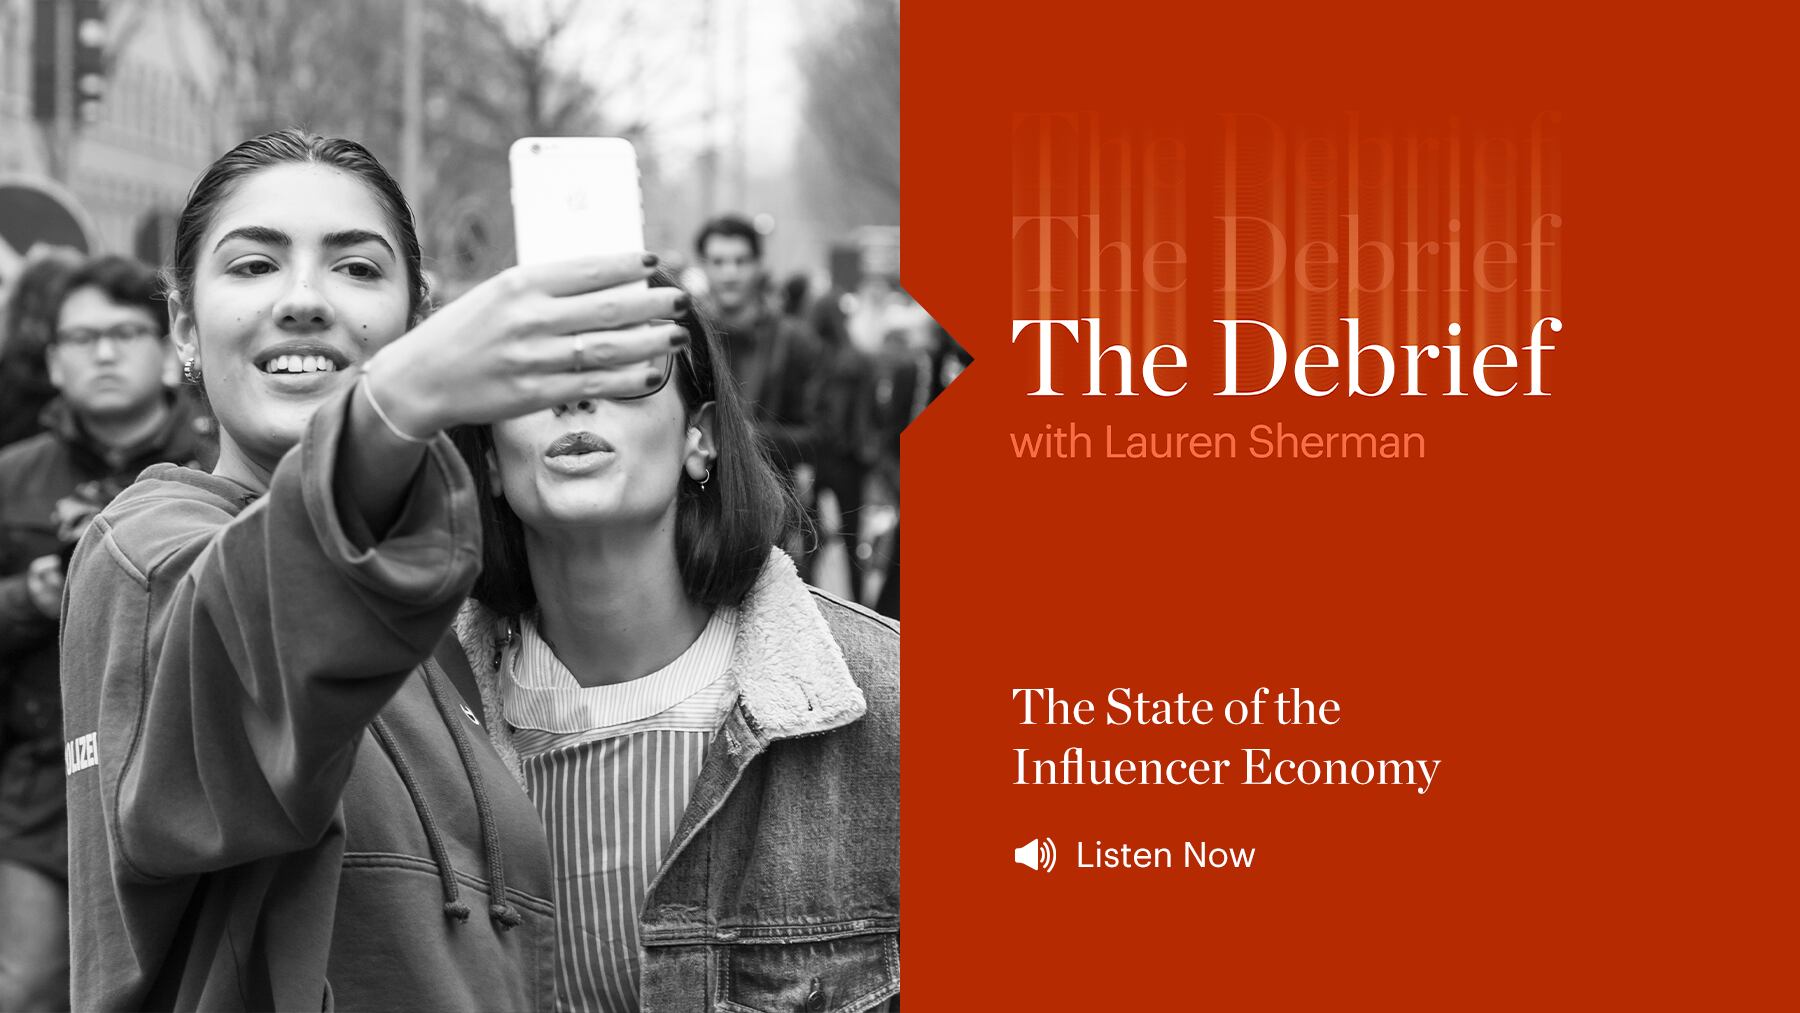 The State of the Influencer Economy